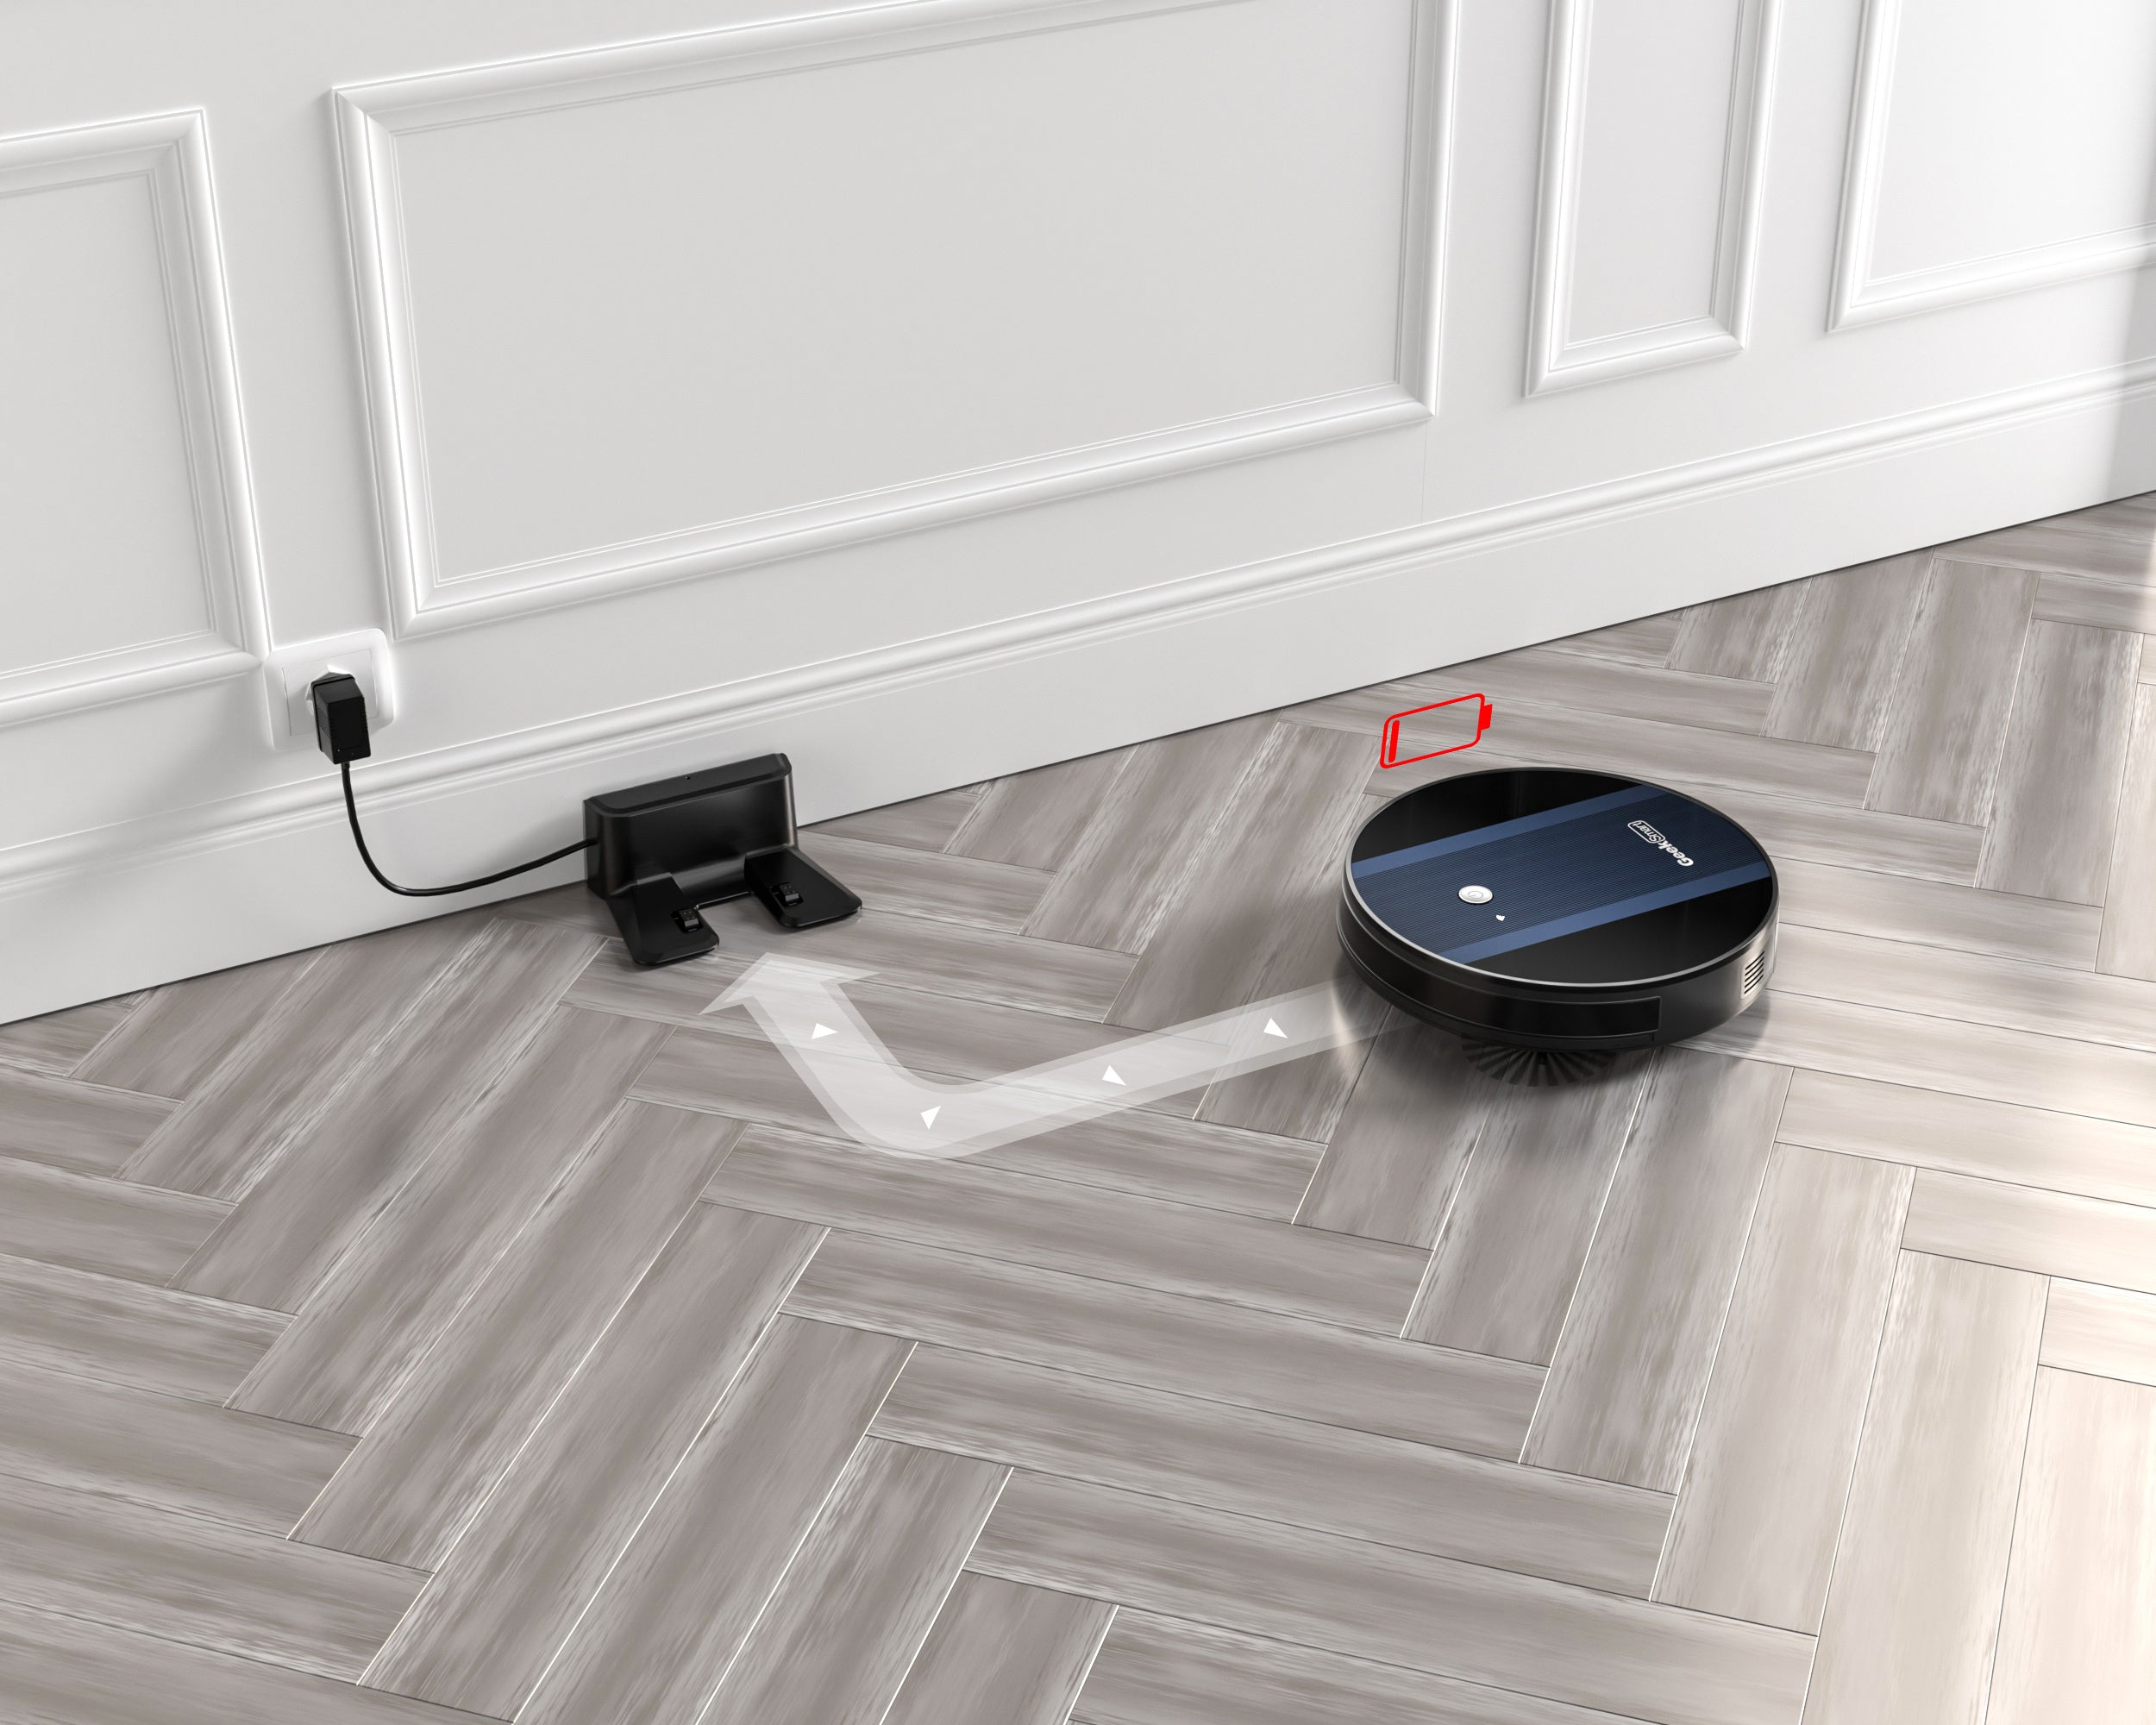 NEW Geek Smart Robot Vacuum Cleaner G6 Plus, Ultra-Thin, 1800Pa Strong Suction, Automatic Self-Charging, Wi-Fi Connectivity, App Control, Custom Cleaning, Great For Hard Floors To Carpets